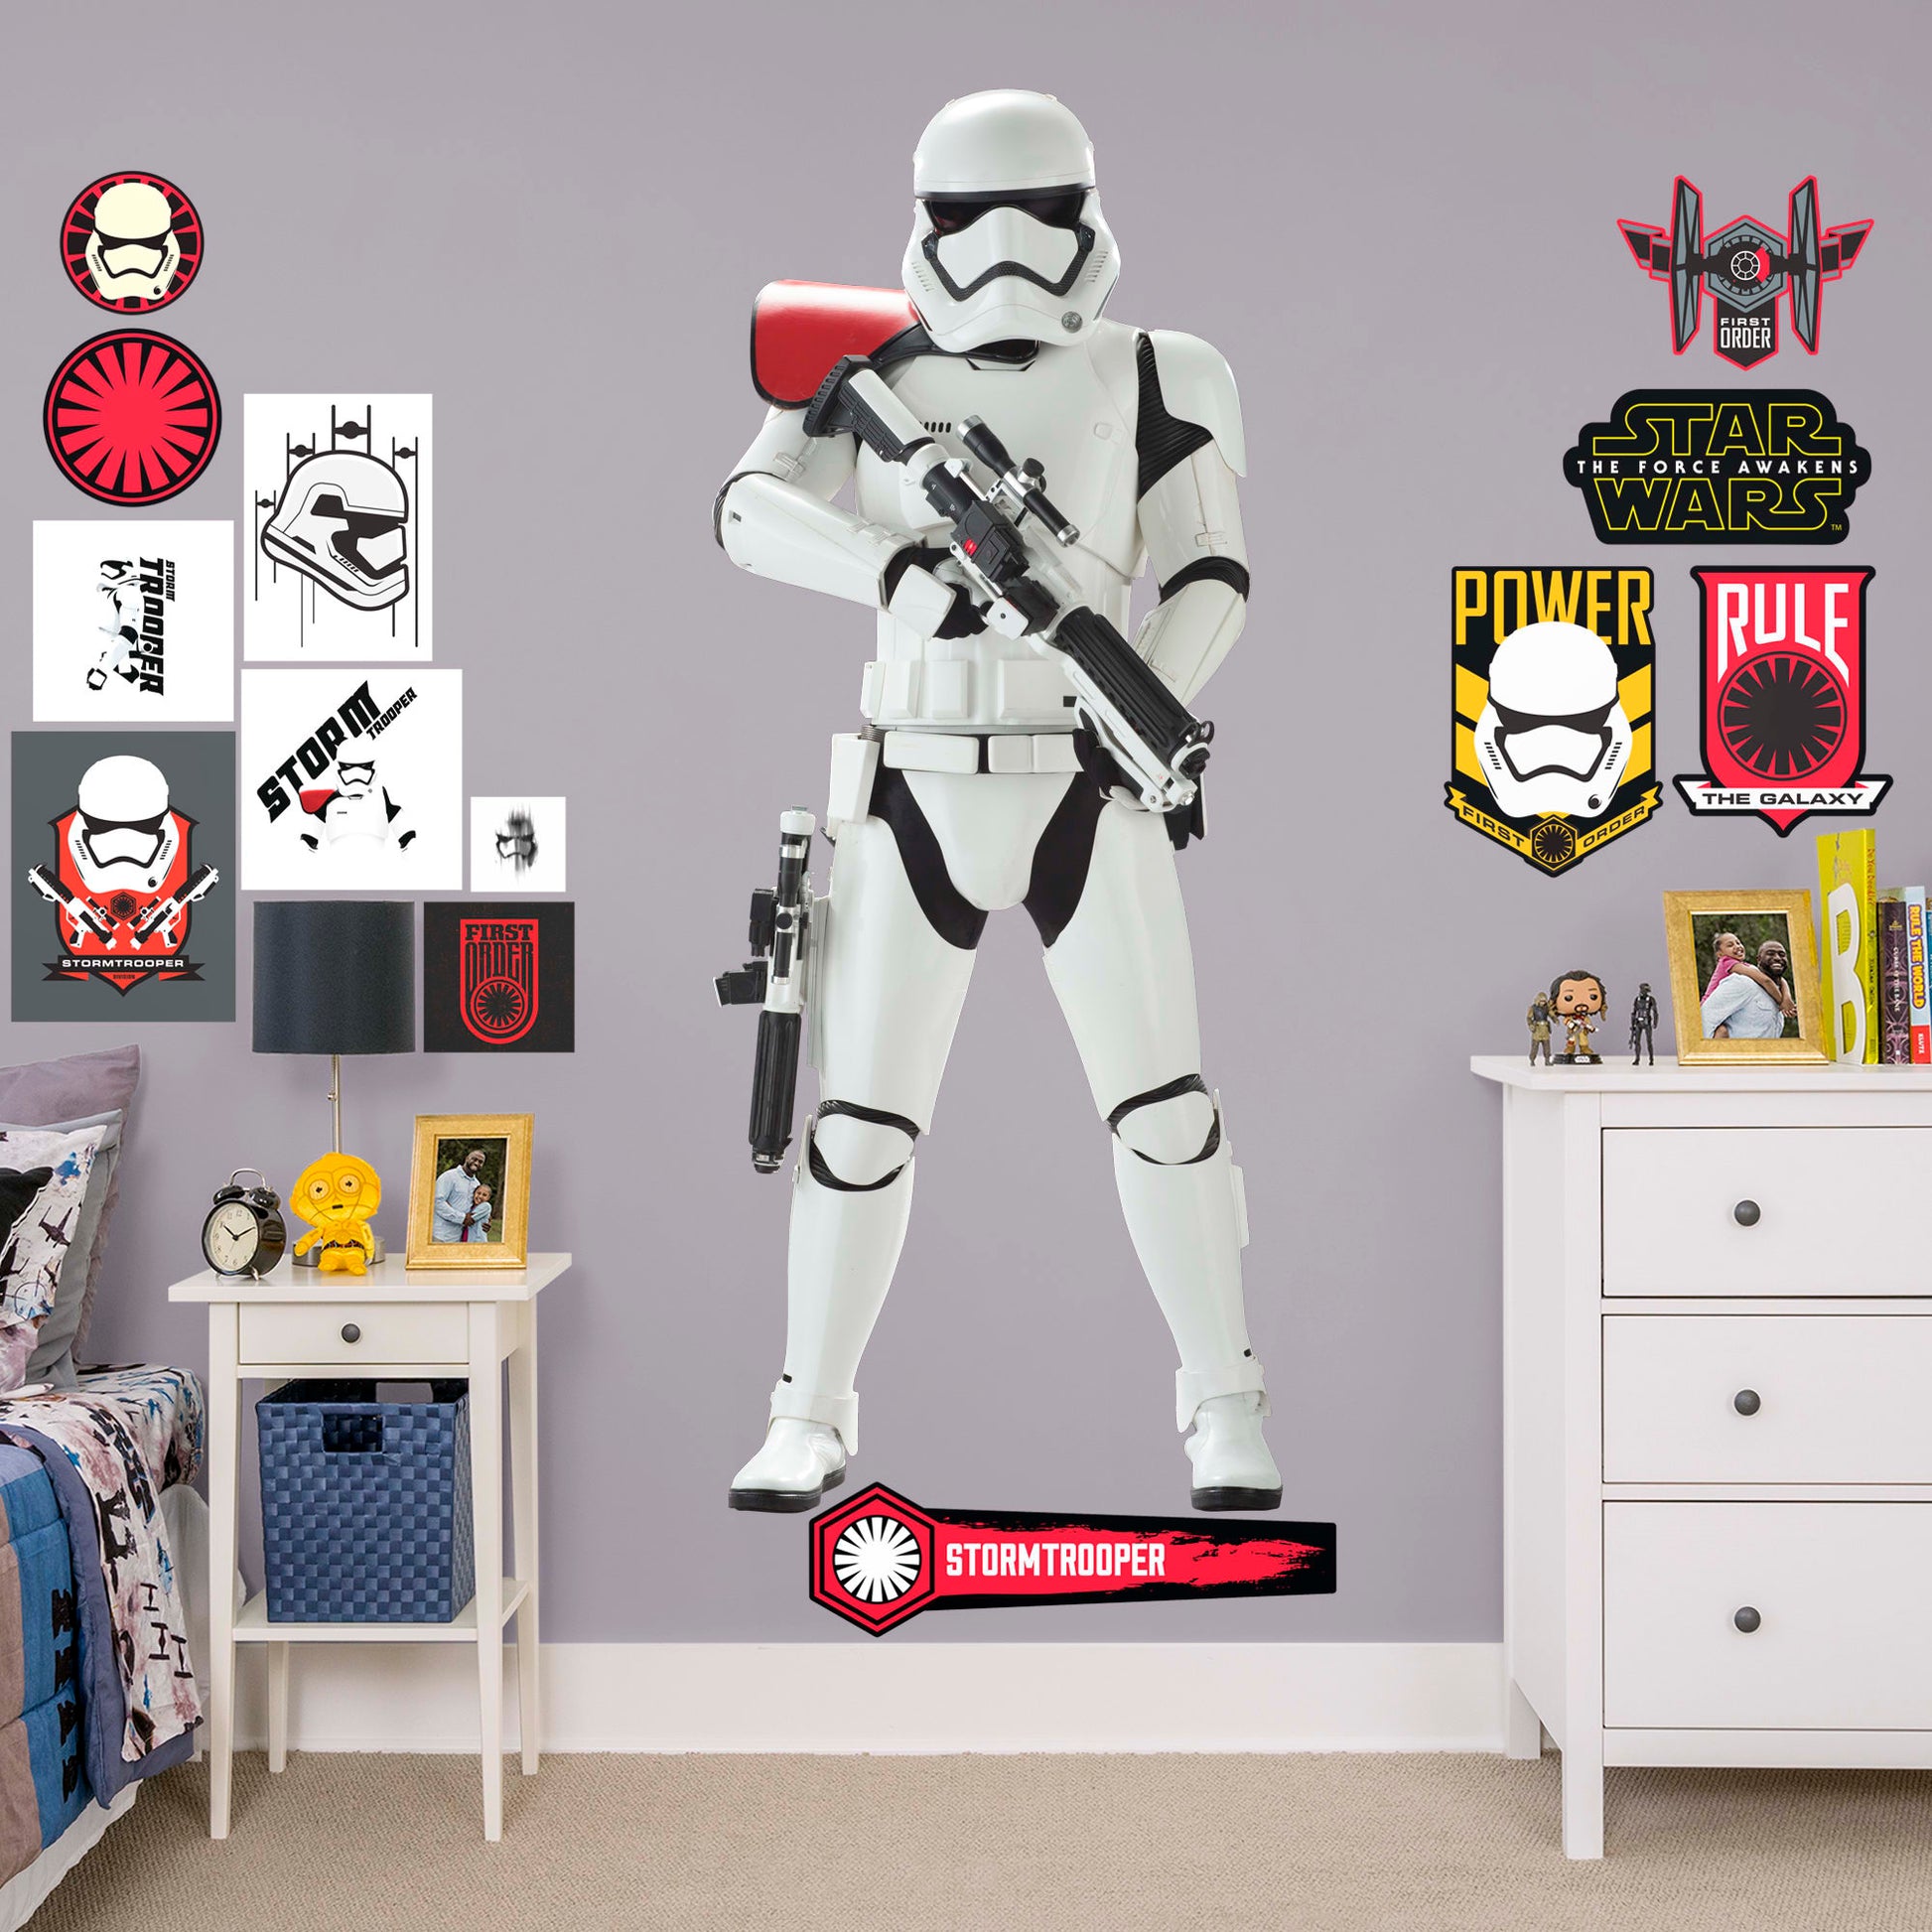 Life-Size Character + 13 Decals (31"W x 78"H)